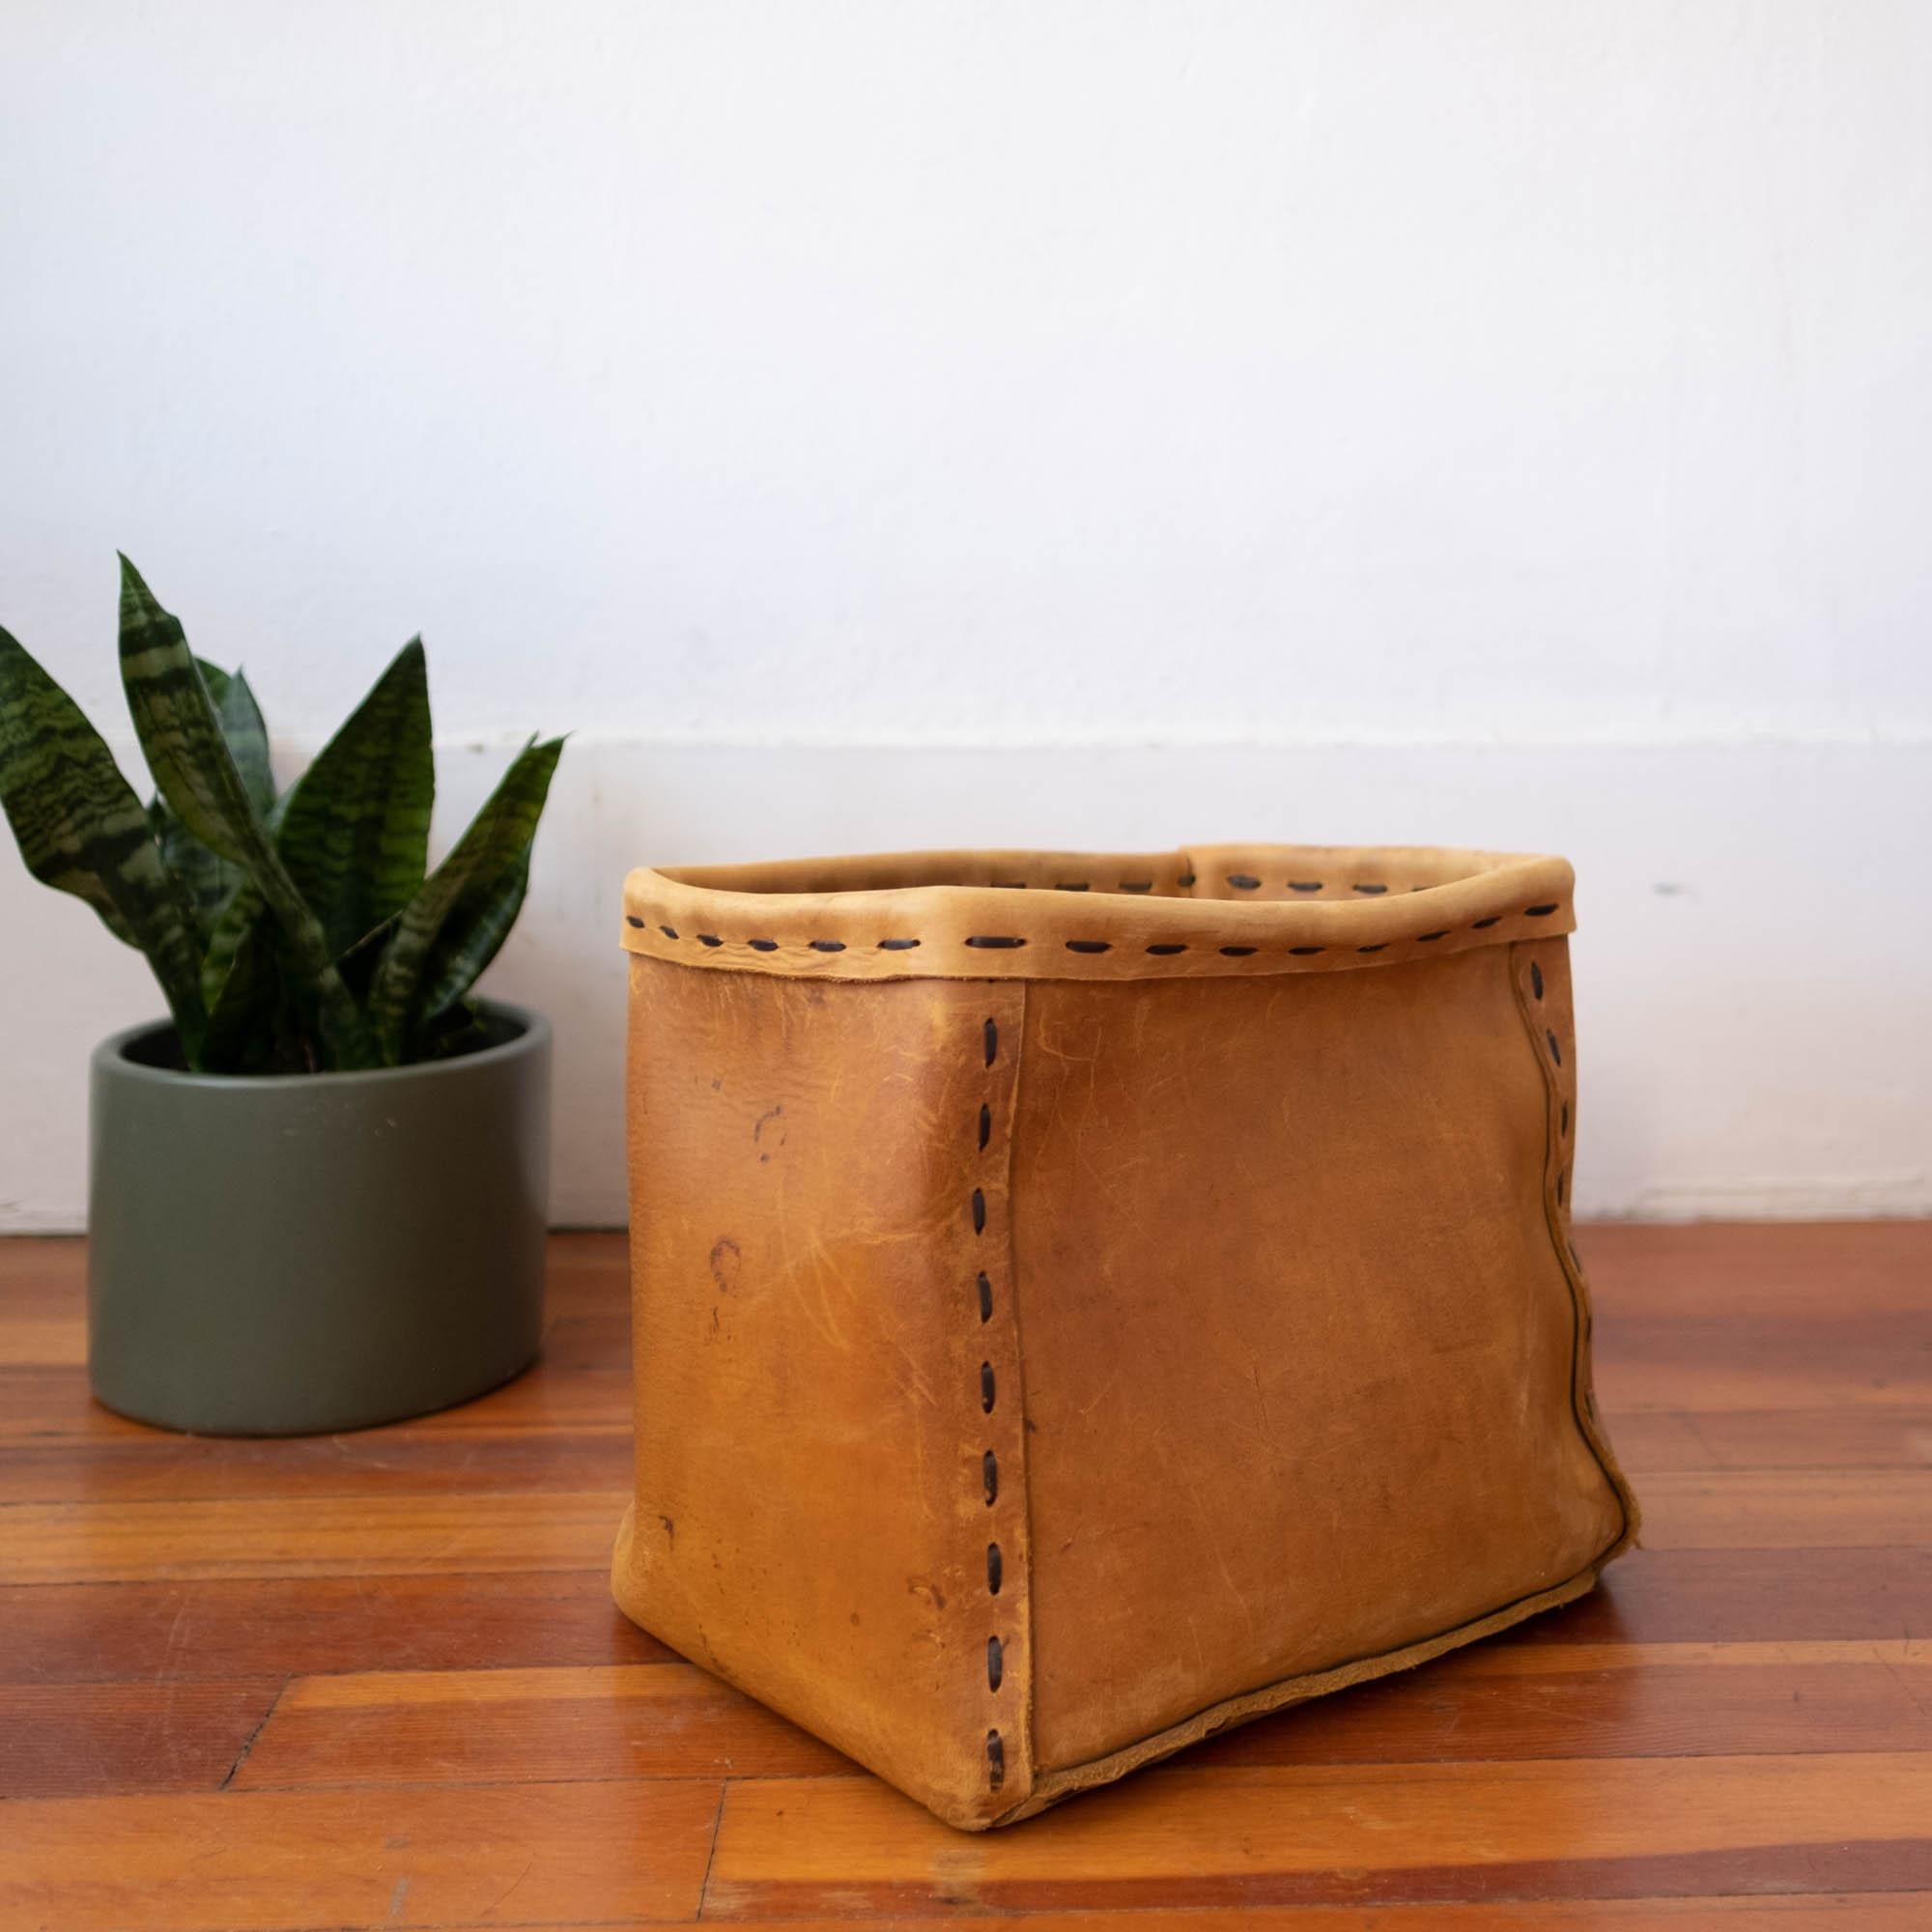 1960s handcrafted leather trash can. Thick leather with a metal piece under the top roll. Functional hippie chic.